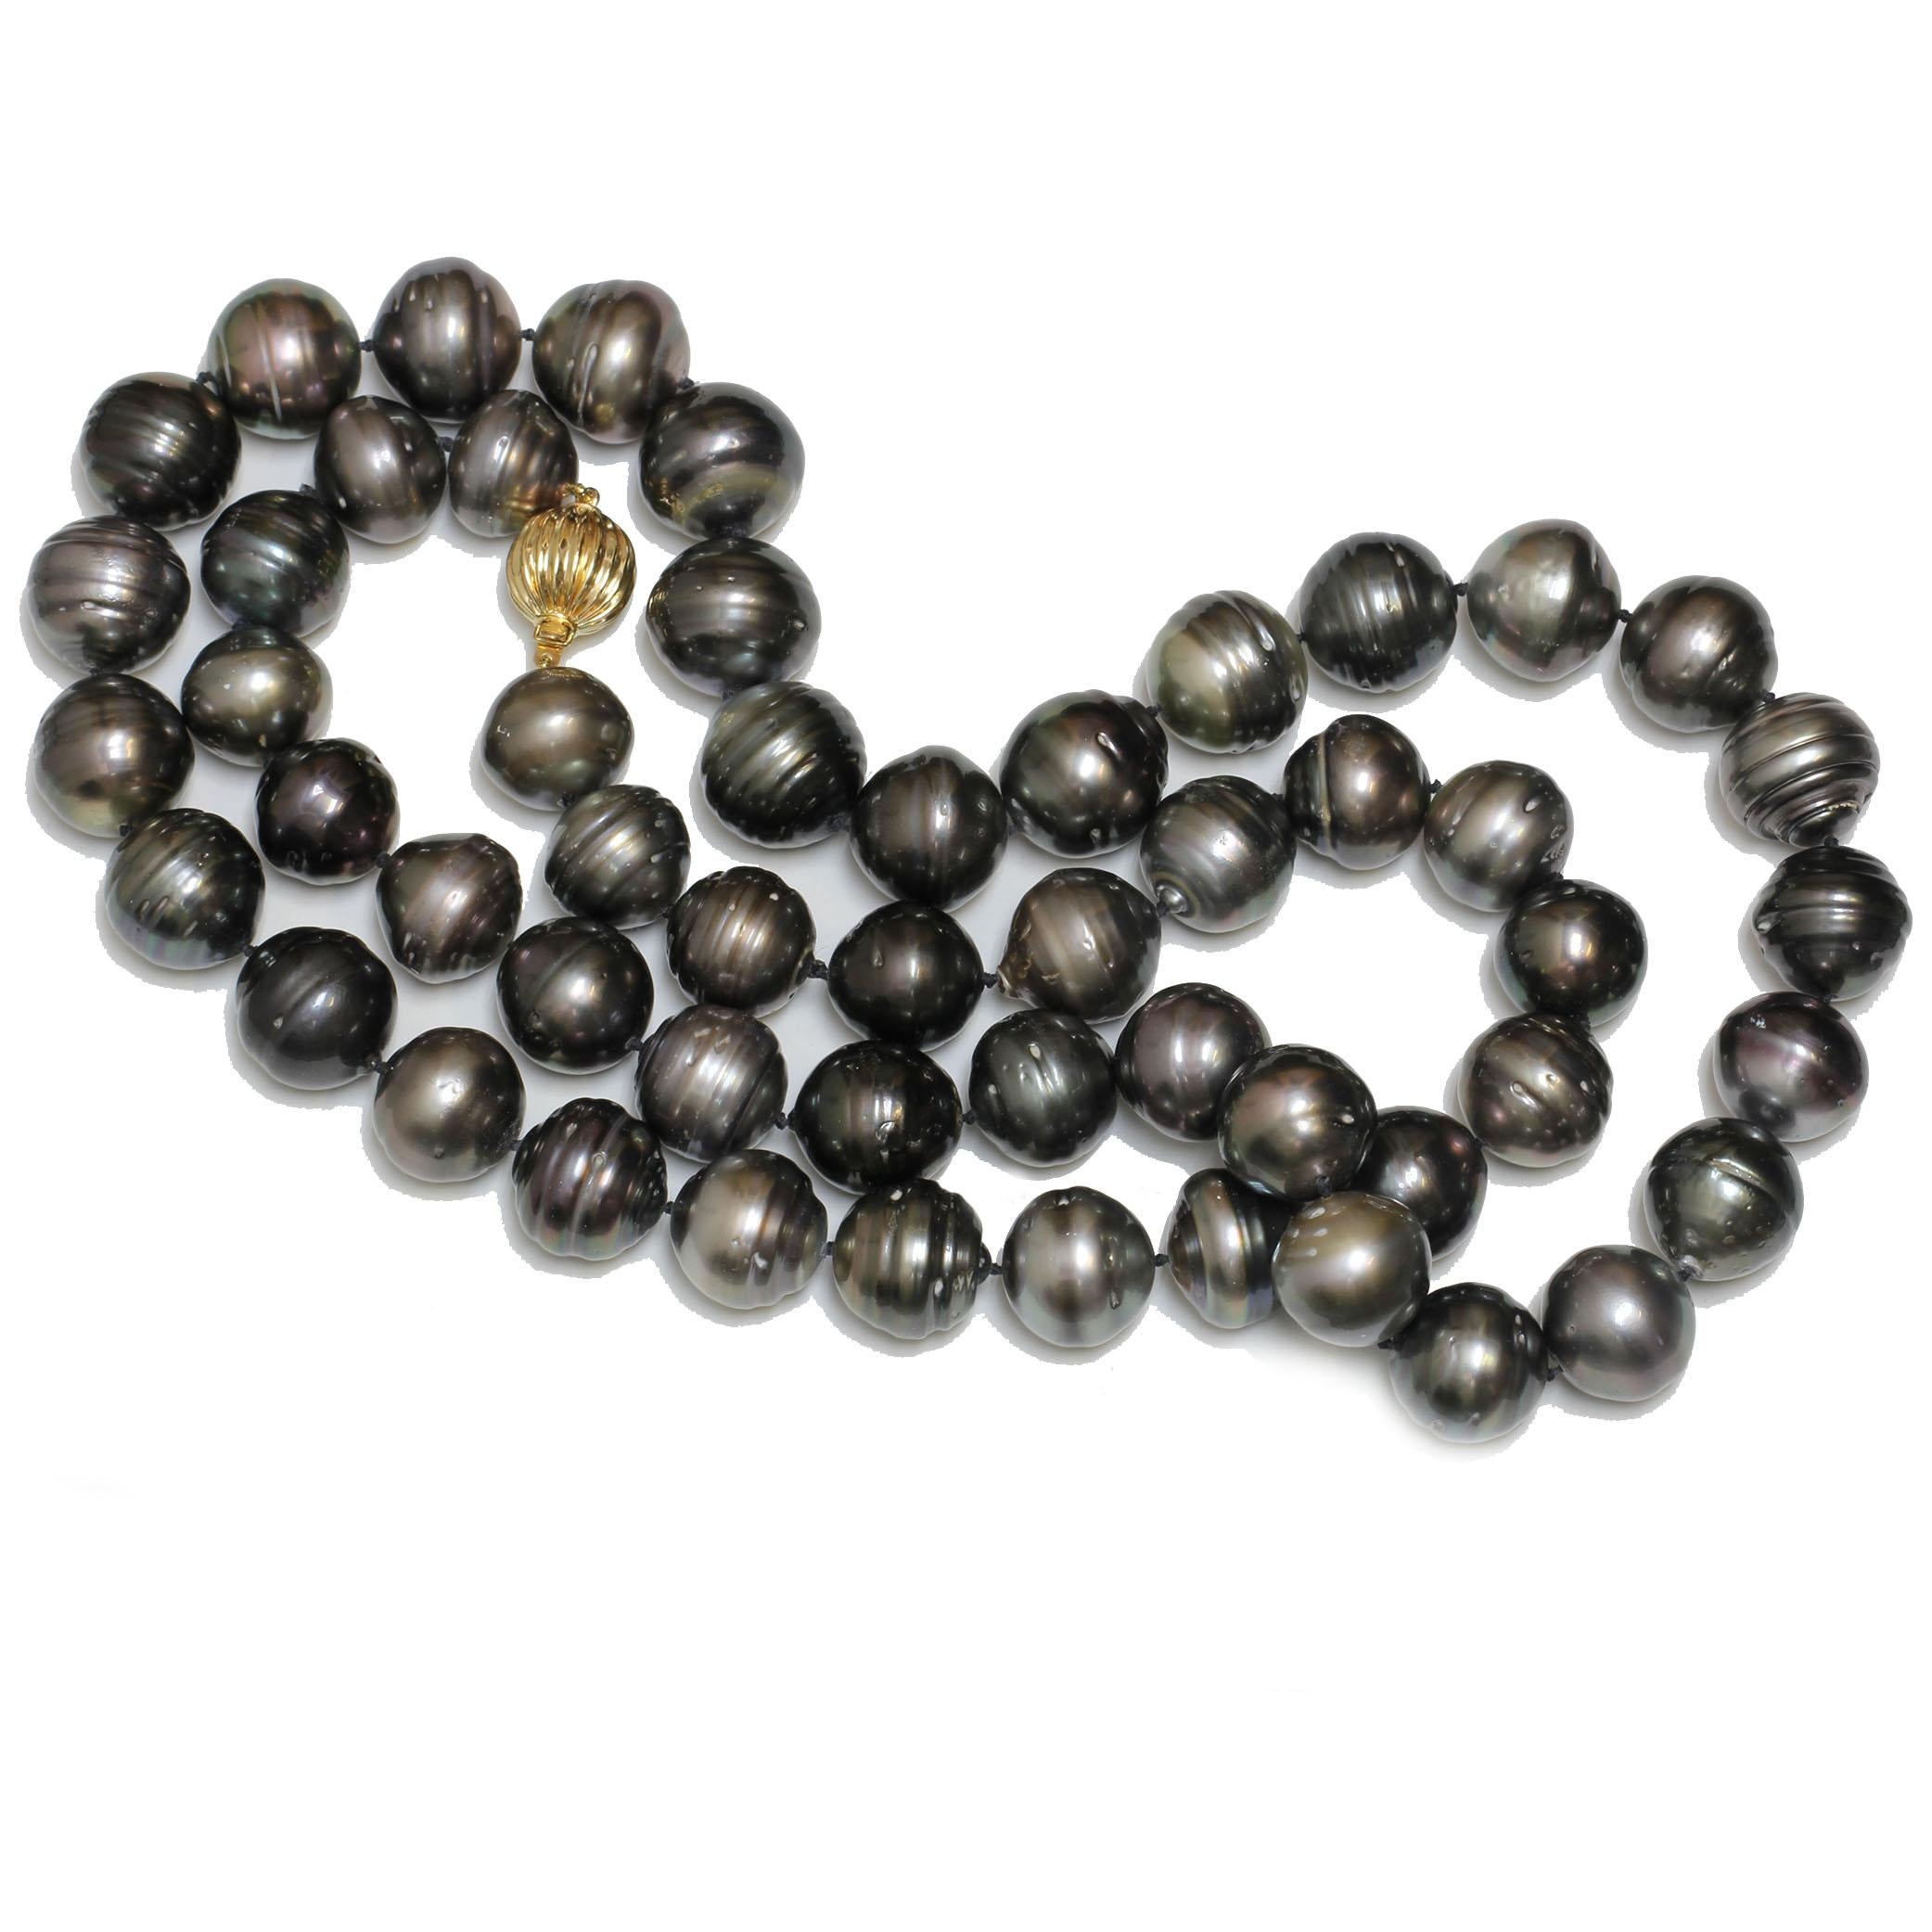 Origin:	French Polynesia
Pearl Type:	Tahitian Pearls
Pearl Size:	17.3 - 15.0 MM
Pearl Color:	Natural Multicolor Black, Green, and Shades of Grays
Pearl Shape:	Near Round / Short Oval
Pearl Surface: AAA-
Pearl Luster:	AAA Gem
Pearl